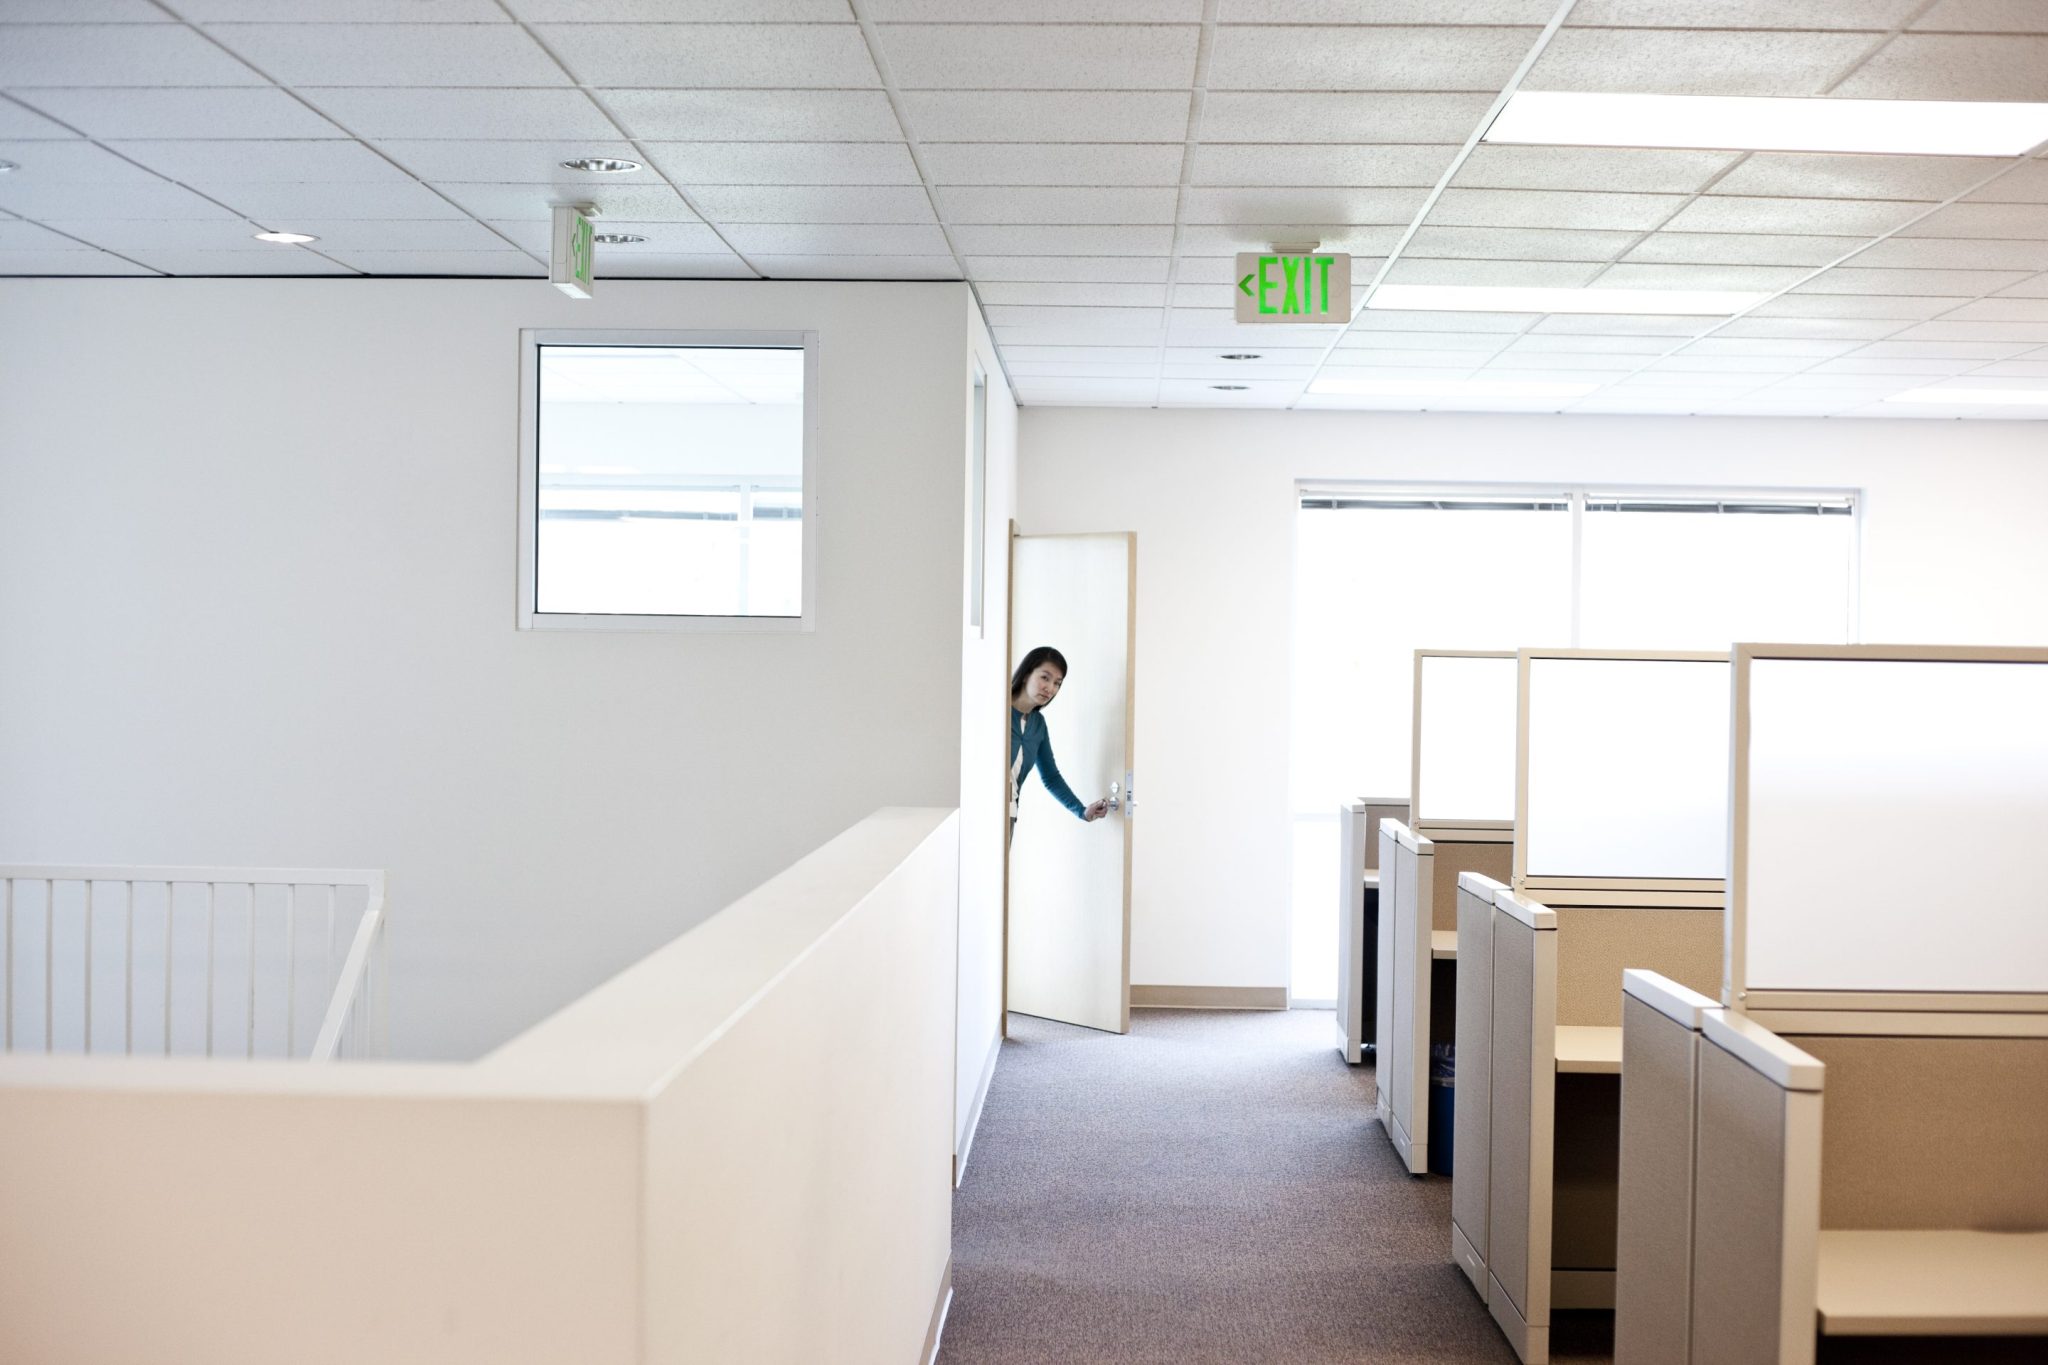 Stanford economist says forcing people back to the office full time is a costly mistake